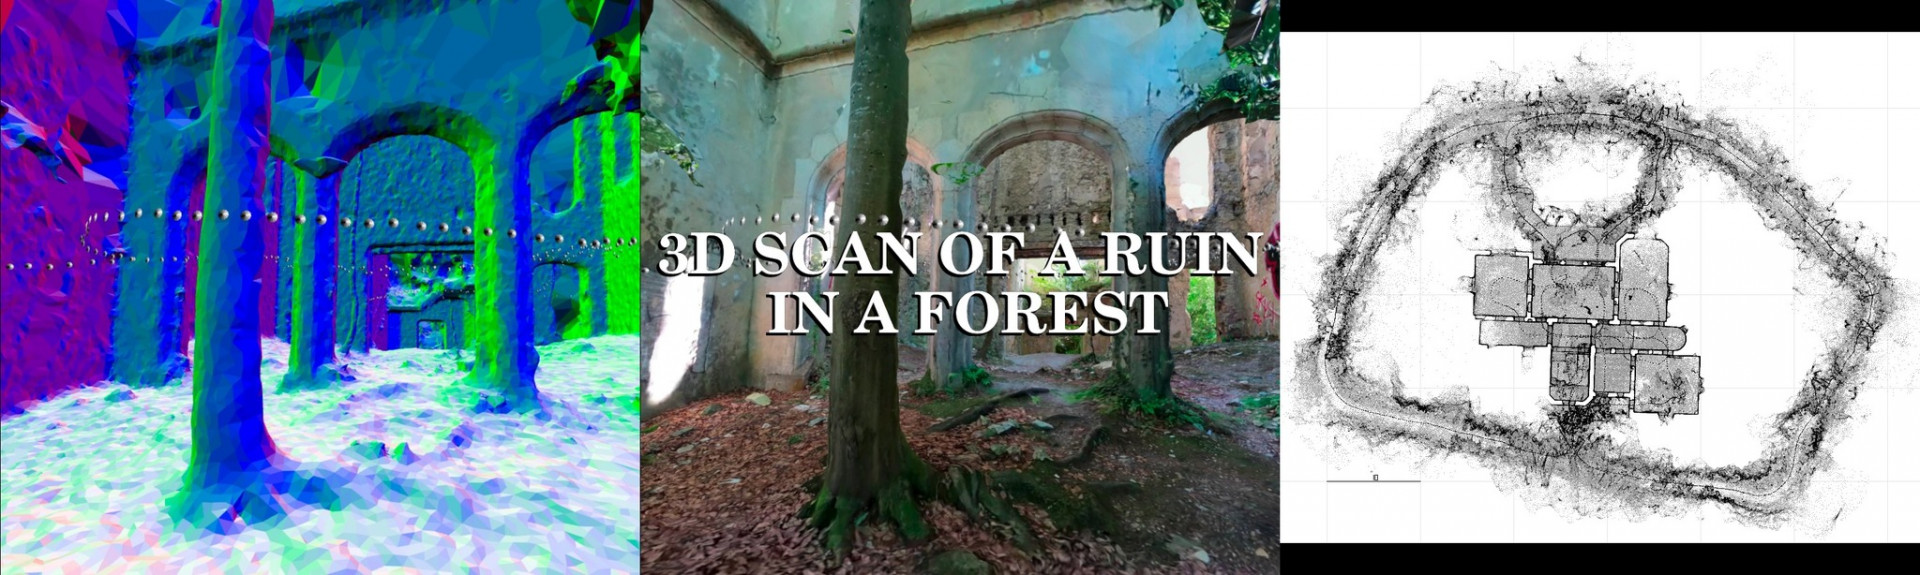 3D scan of a ruin in a forest